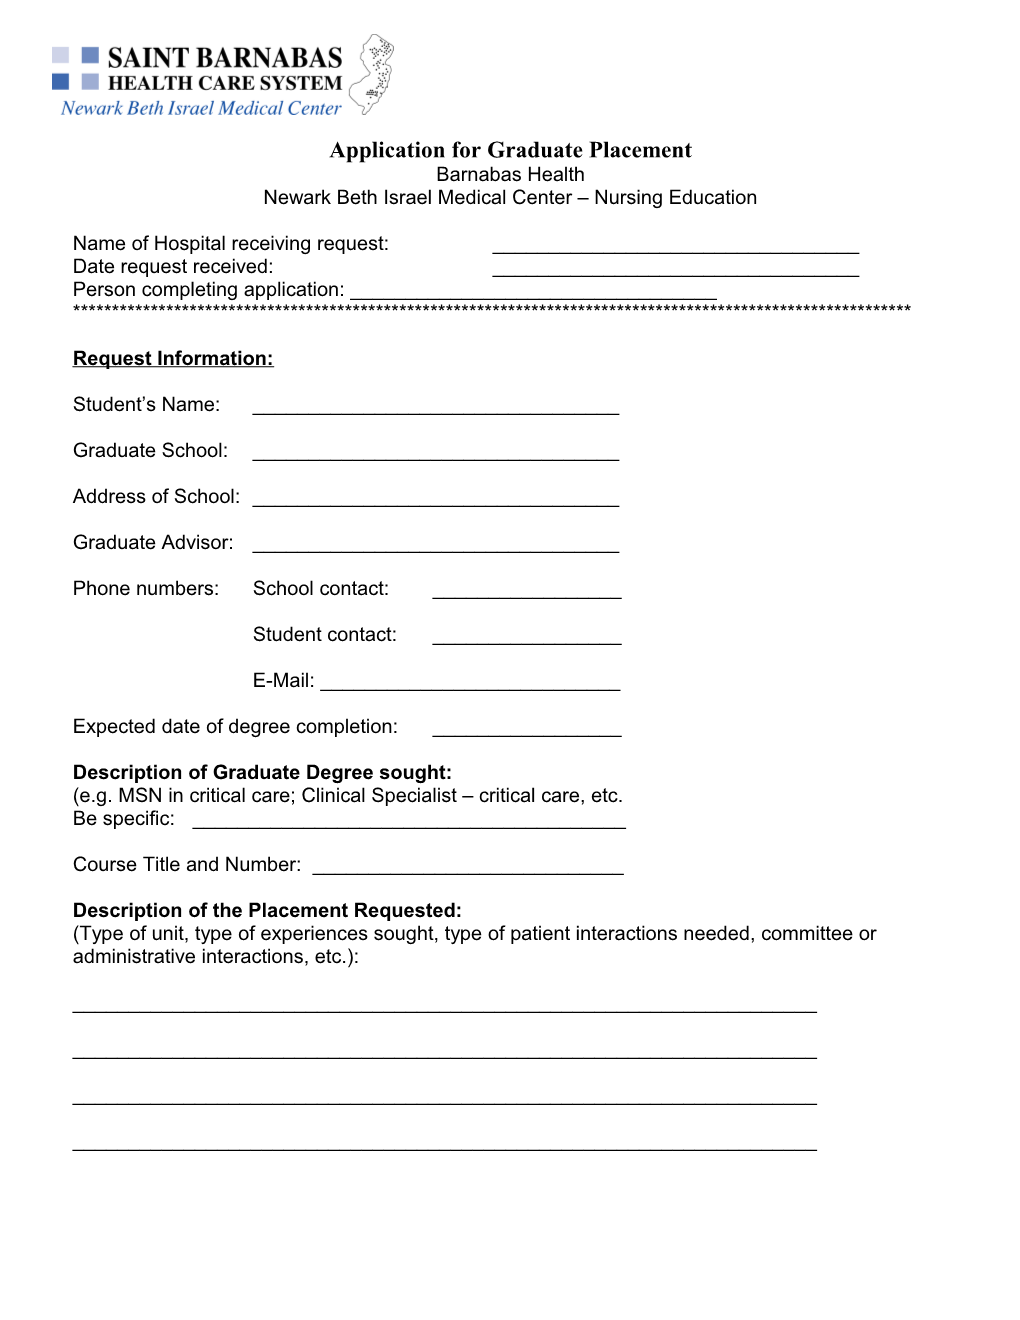 Application for Graduate Placement